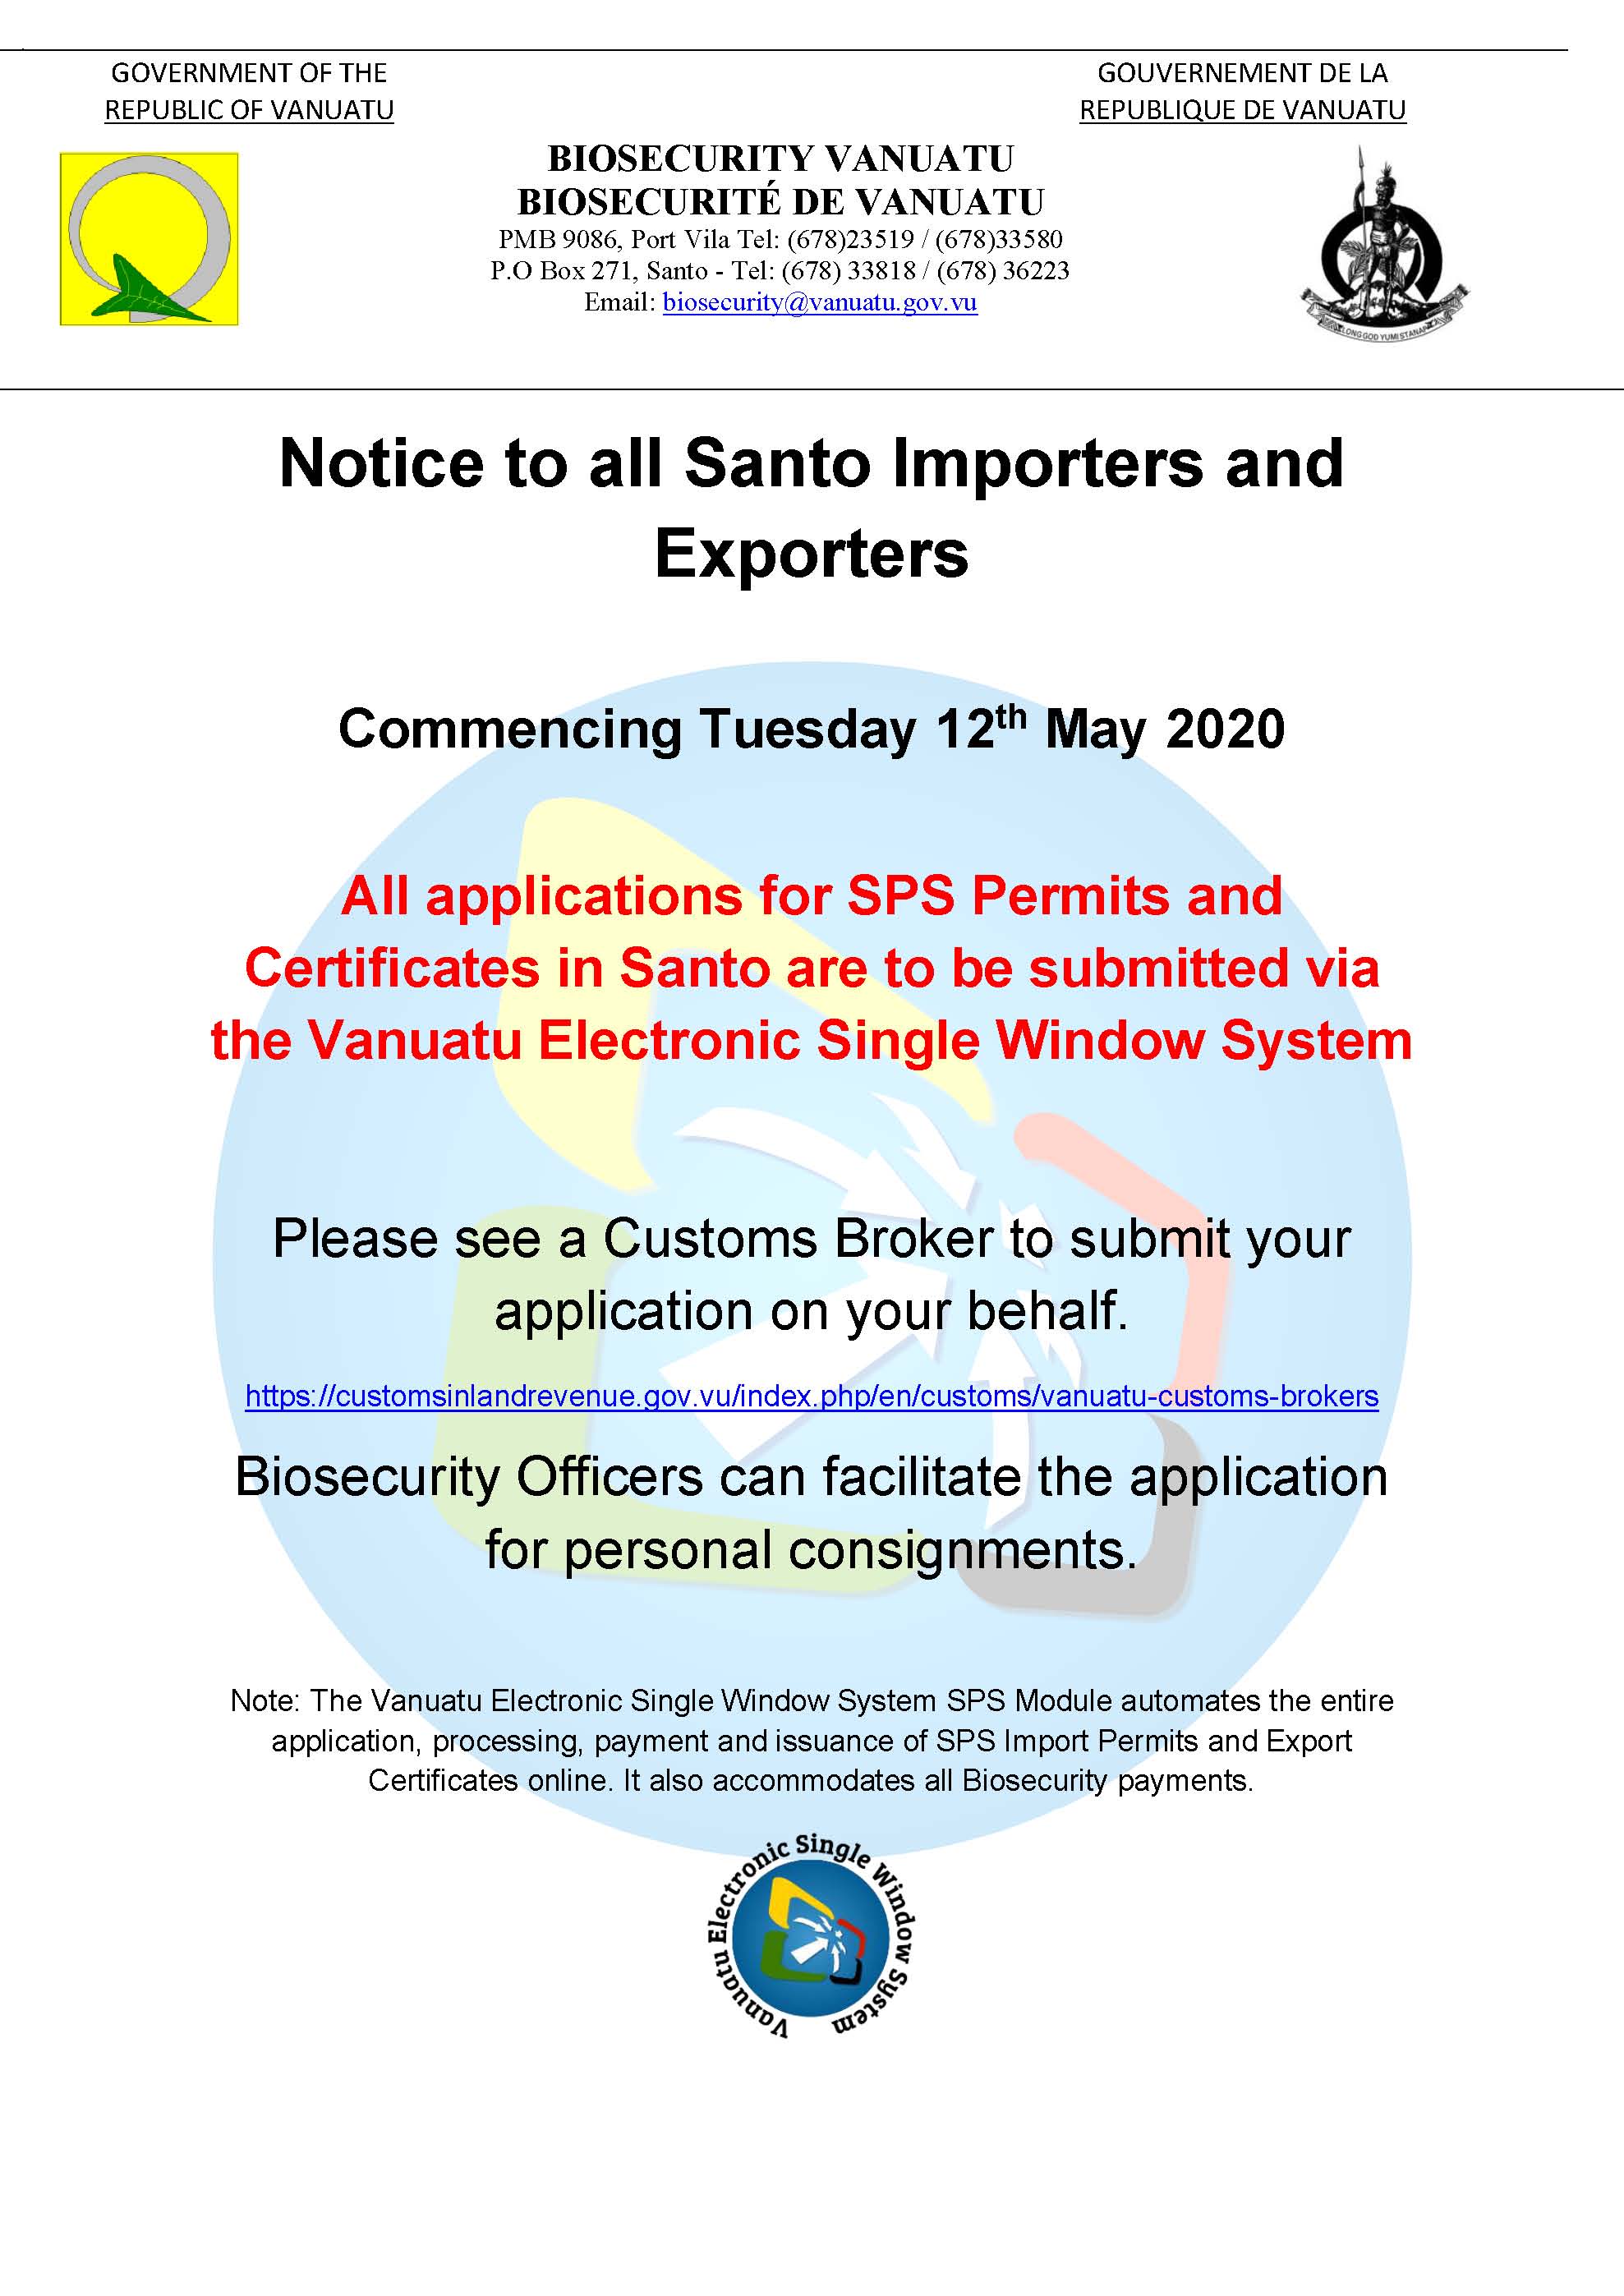 Notice to all Importers and Exporters in Luganville, Santo.